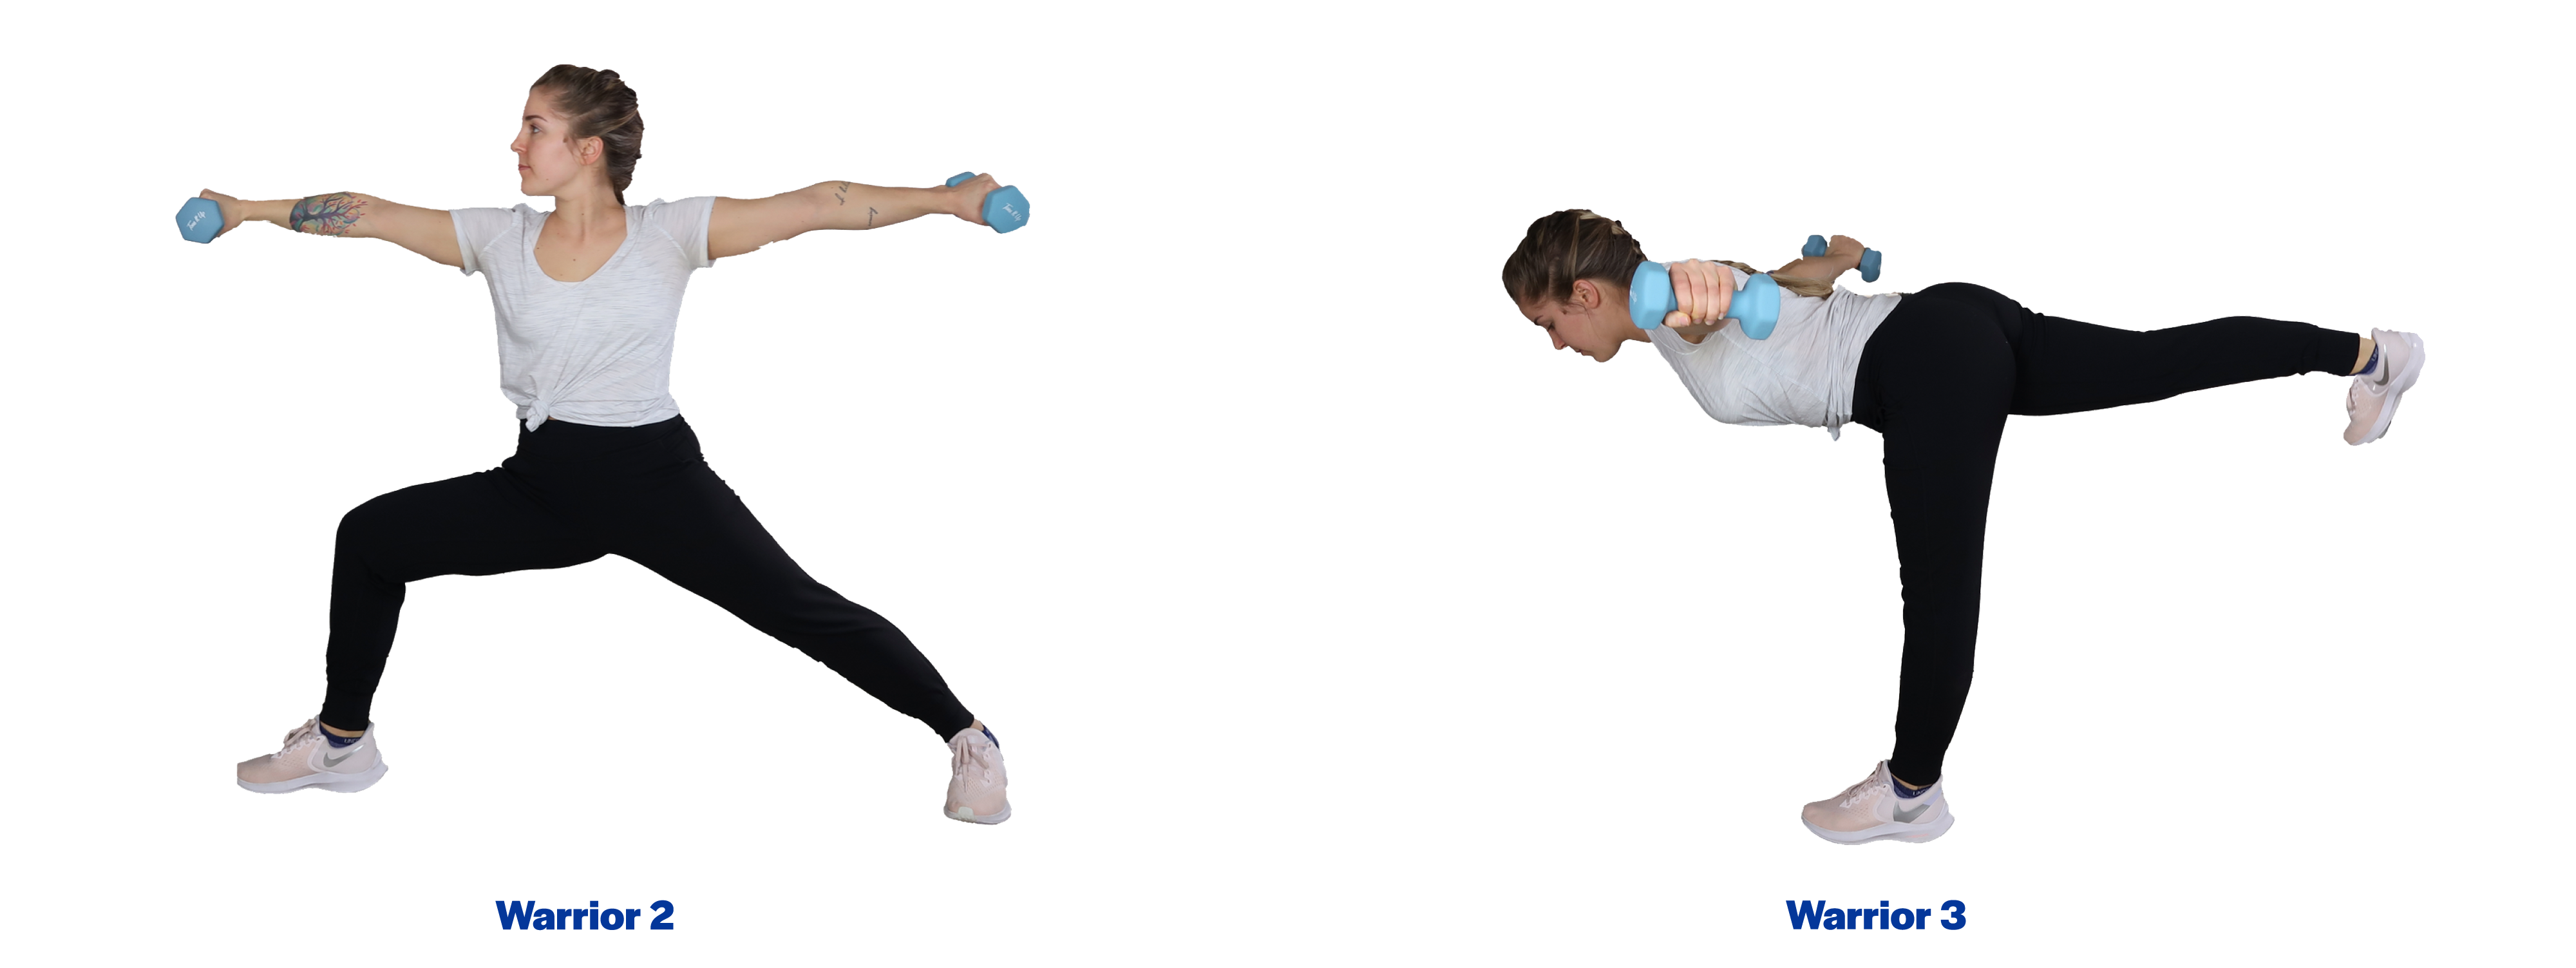 Left: A young woman demonstrating the warrior 2 pose. Right: A young woman demonstrating the warrior 3 pose. For a complete description of the movements, call SDSU Extension at 605-688-6729.